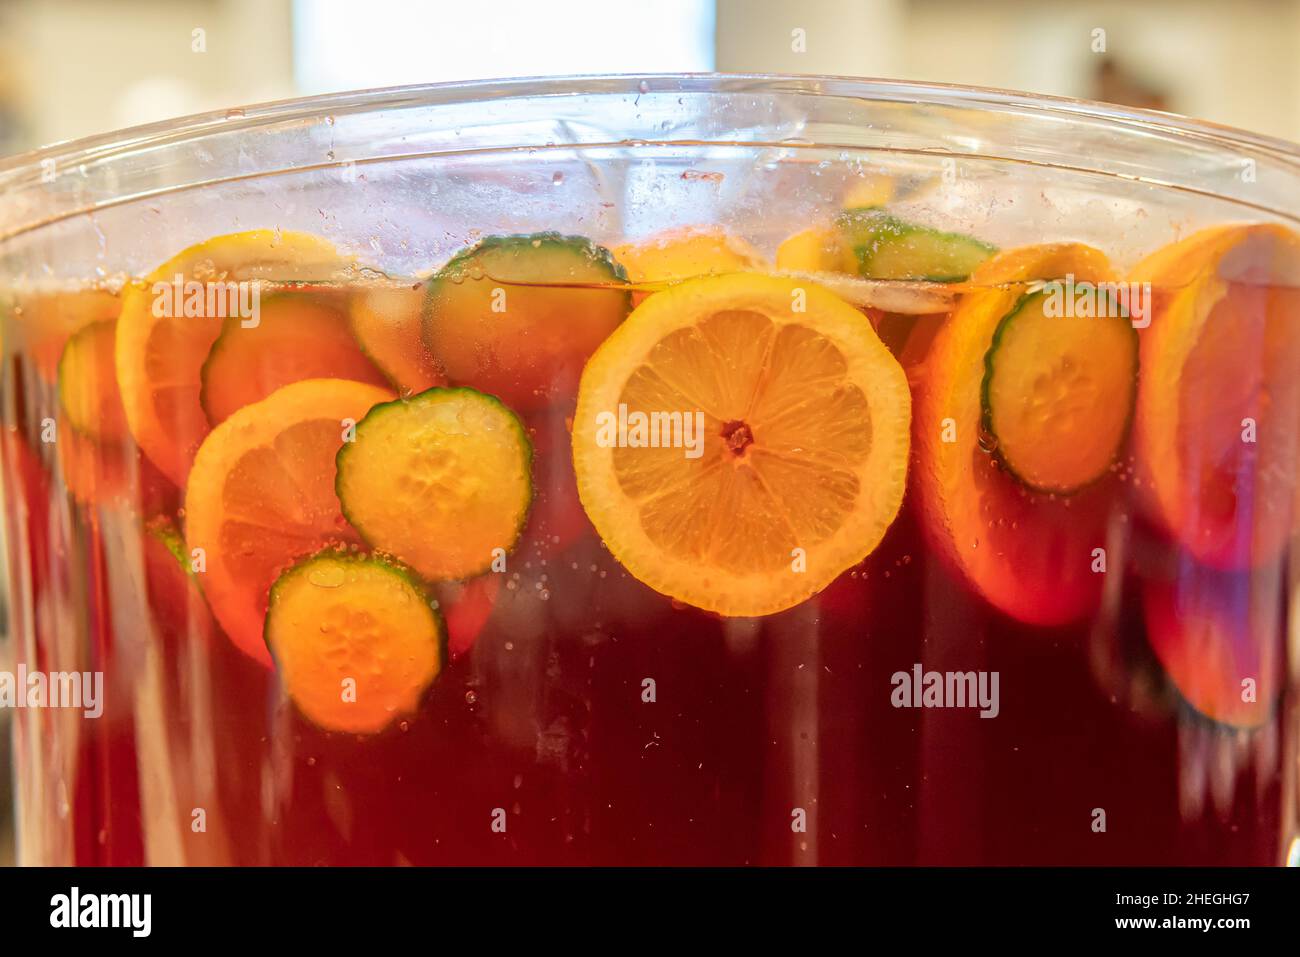 https://c8.alamy.com/comp/2HEGHG7/non-alcoholic-fruit-punch-in-dispenser-ready-to-drink-2HEGHG7.jpg